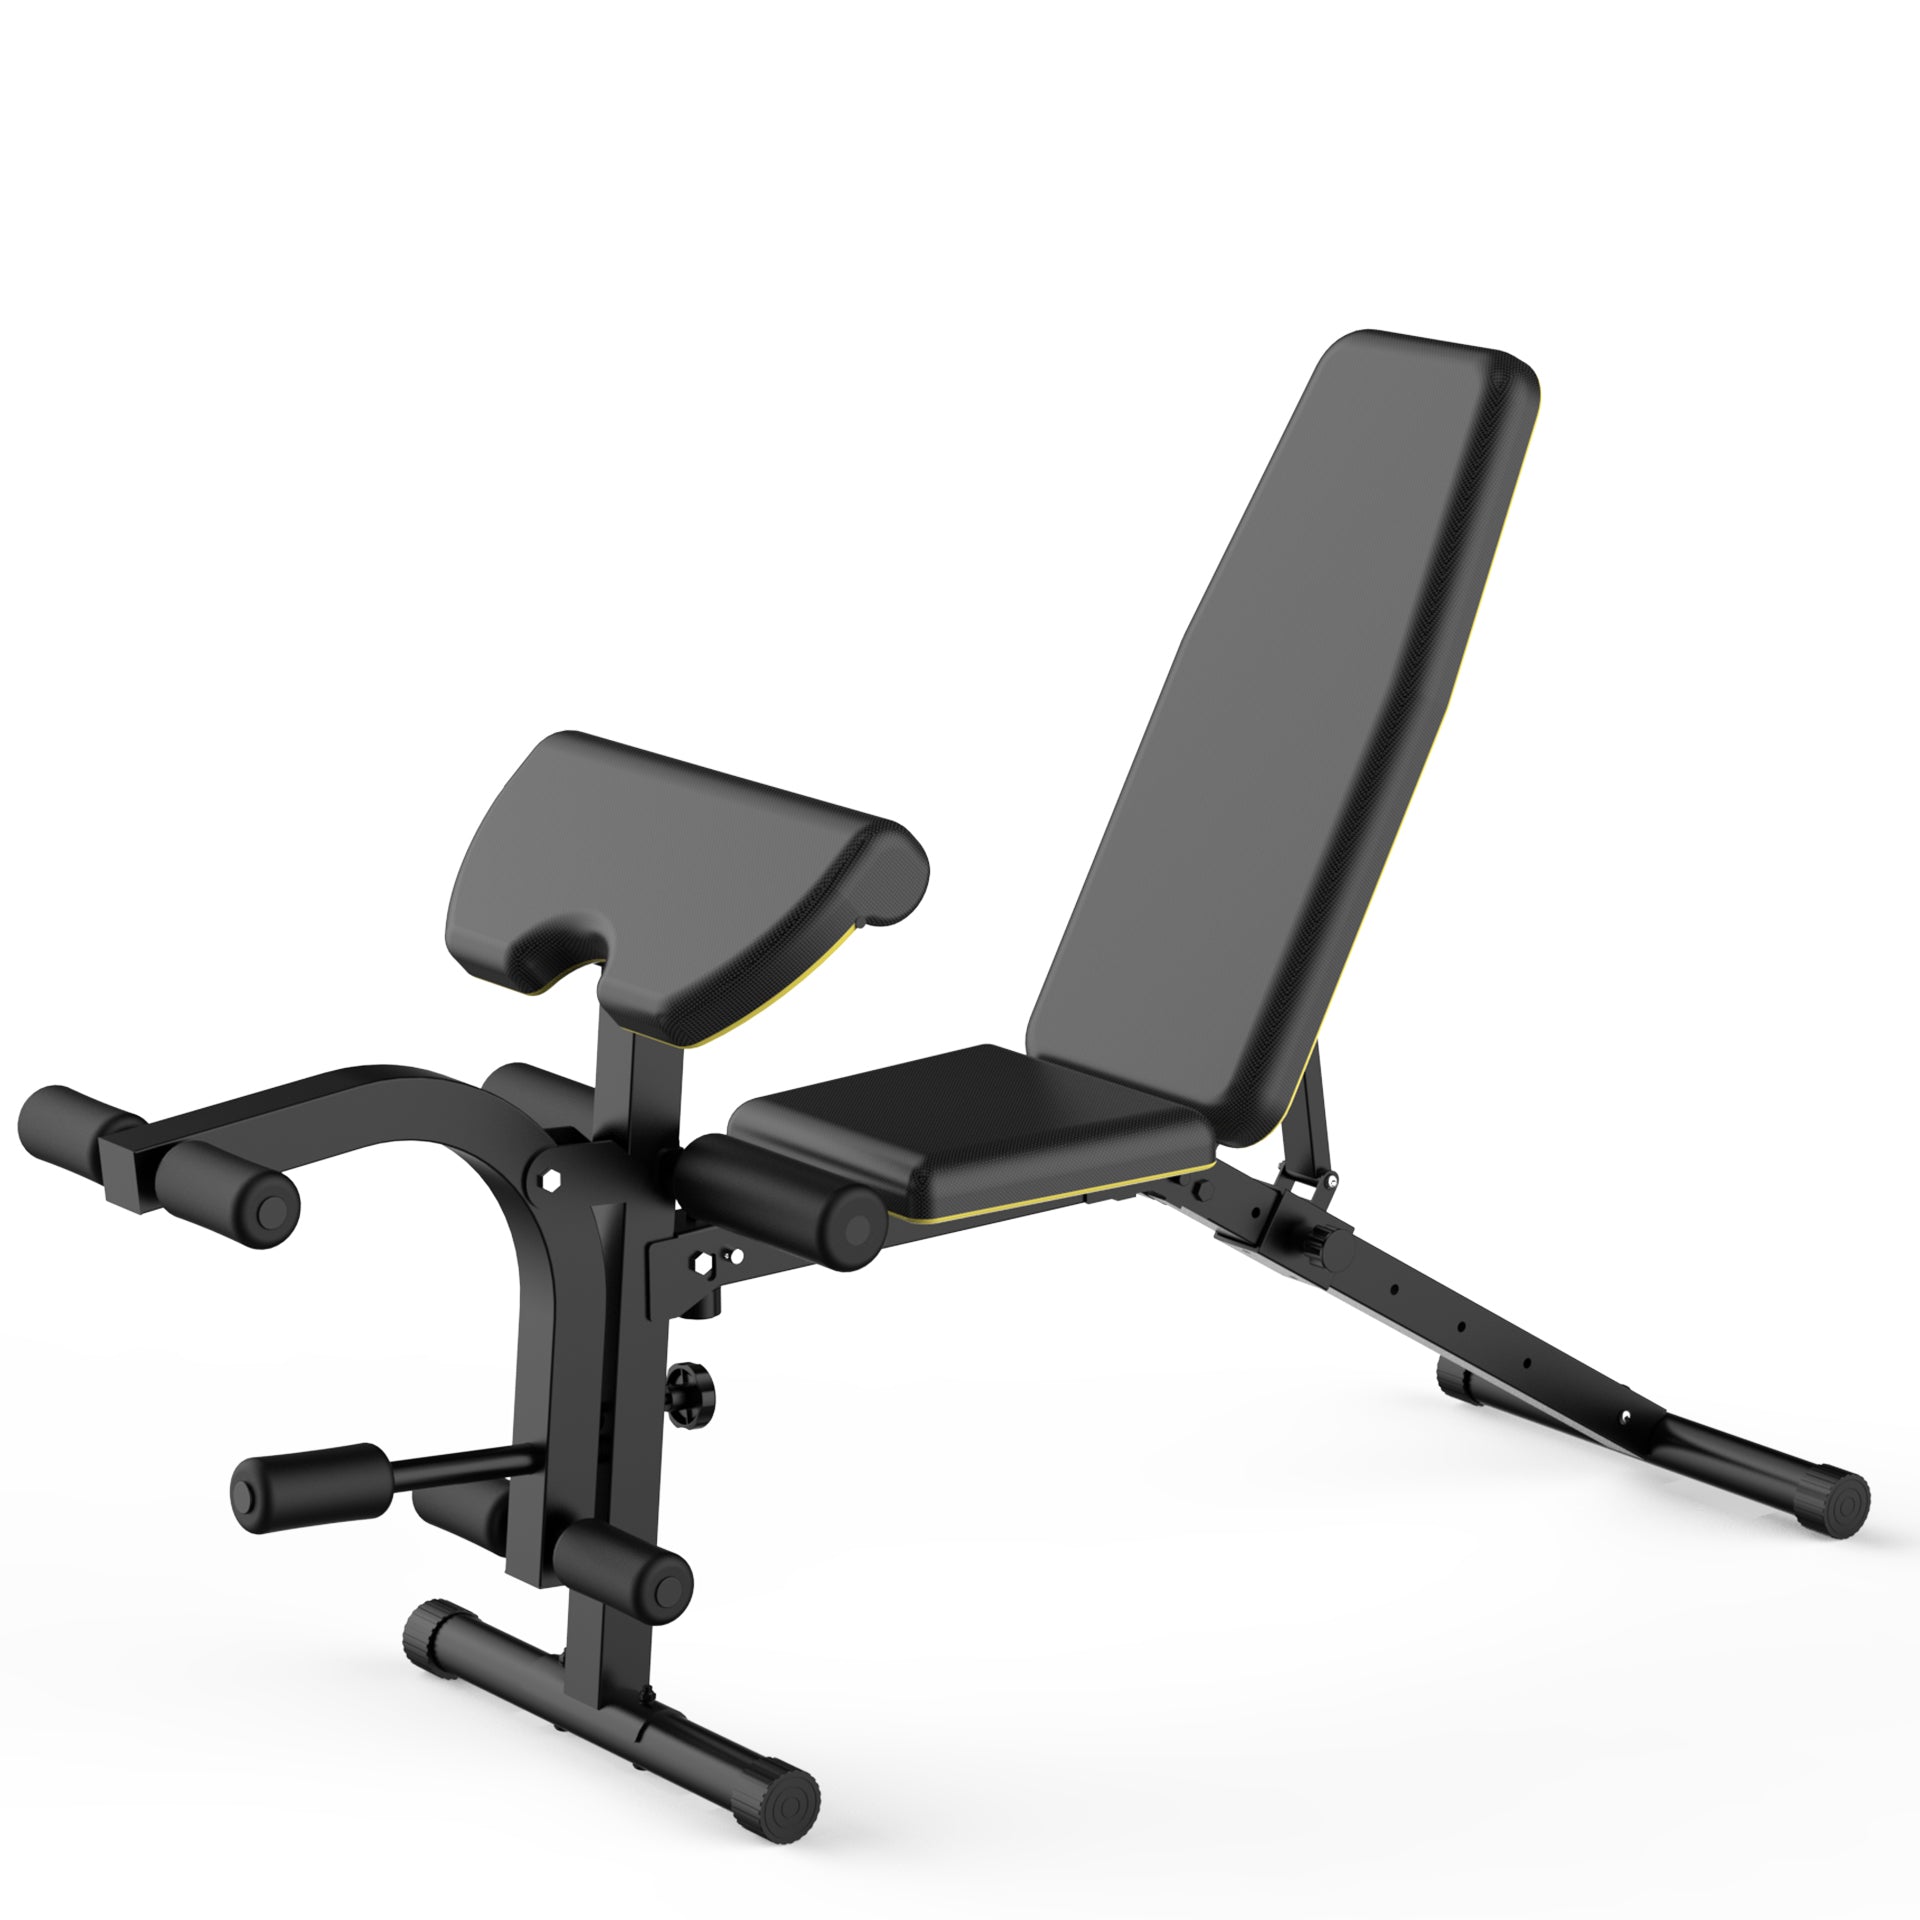 Yesoul Adjustable Weight Bench